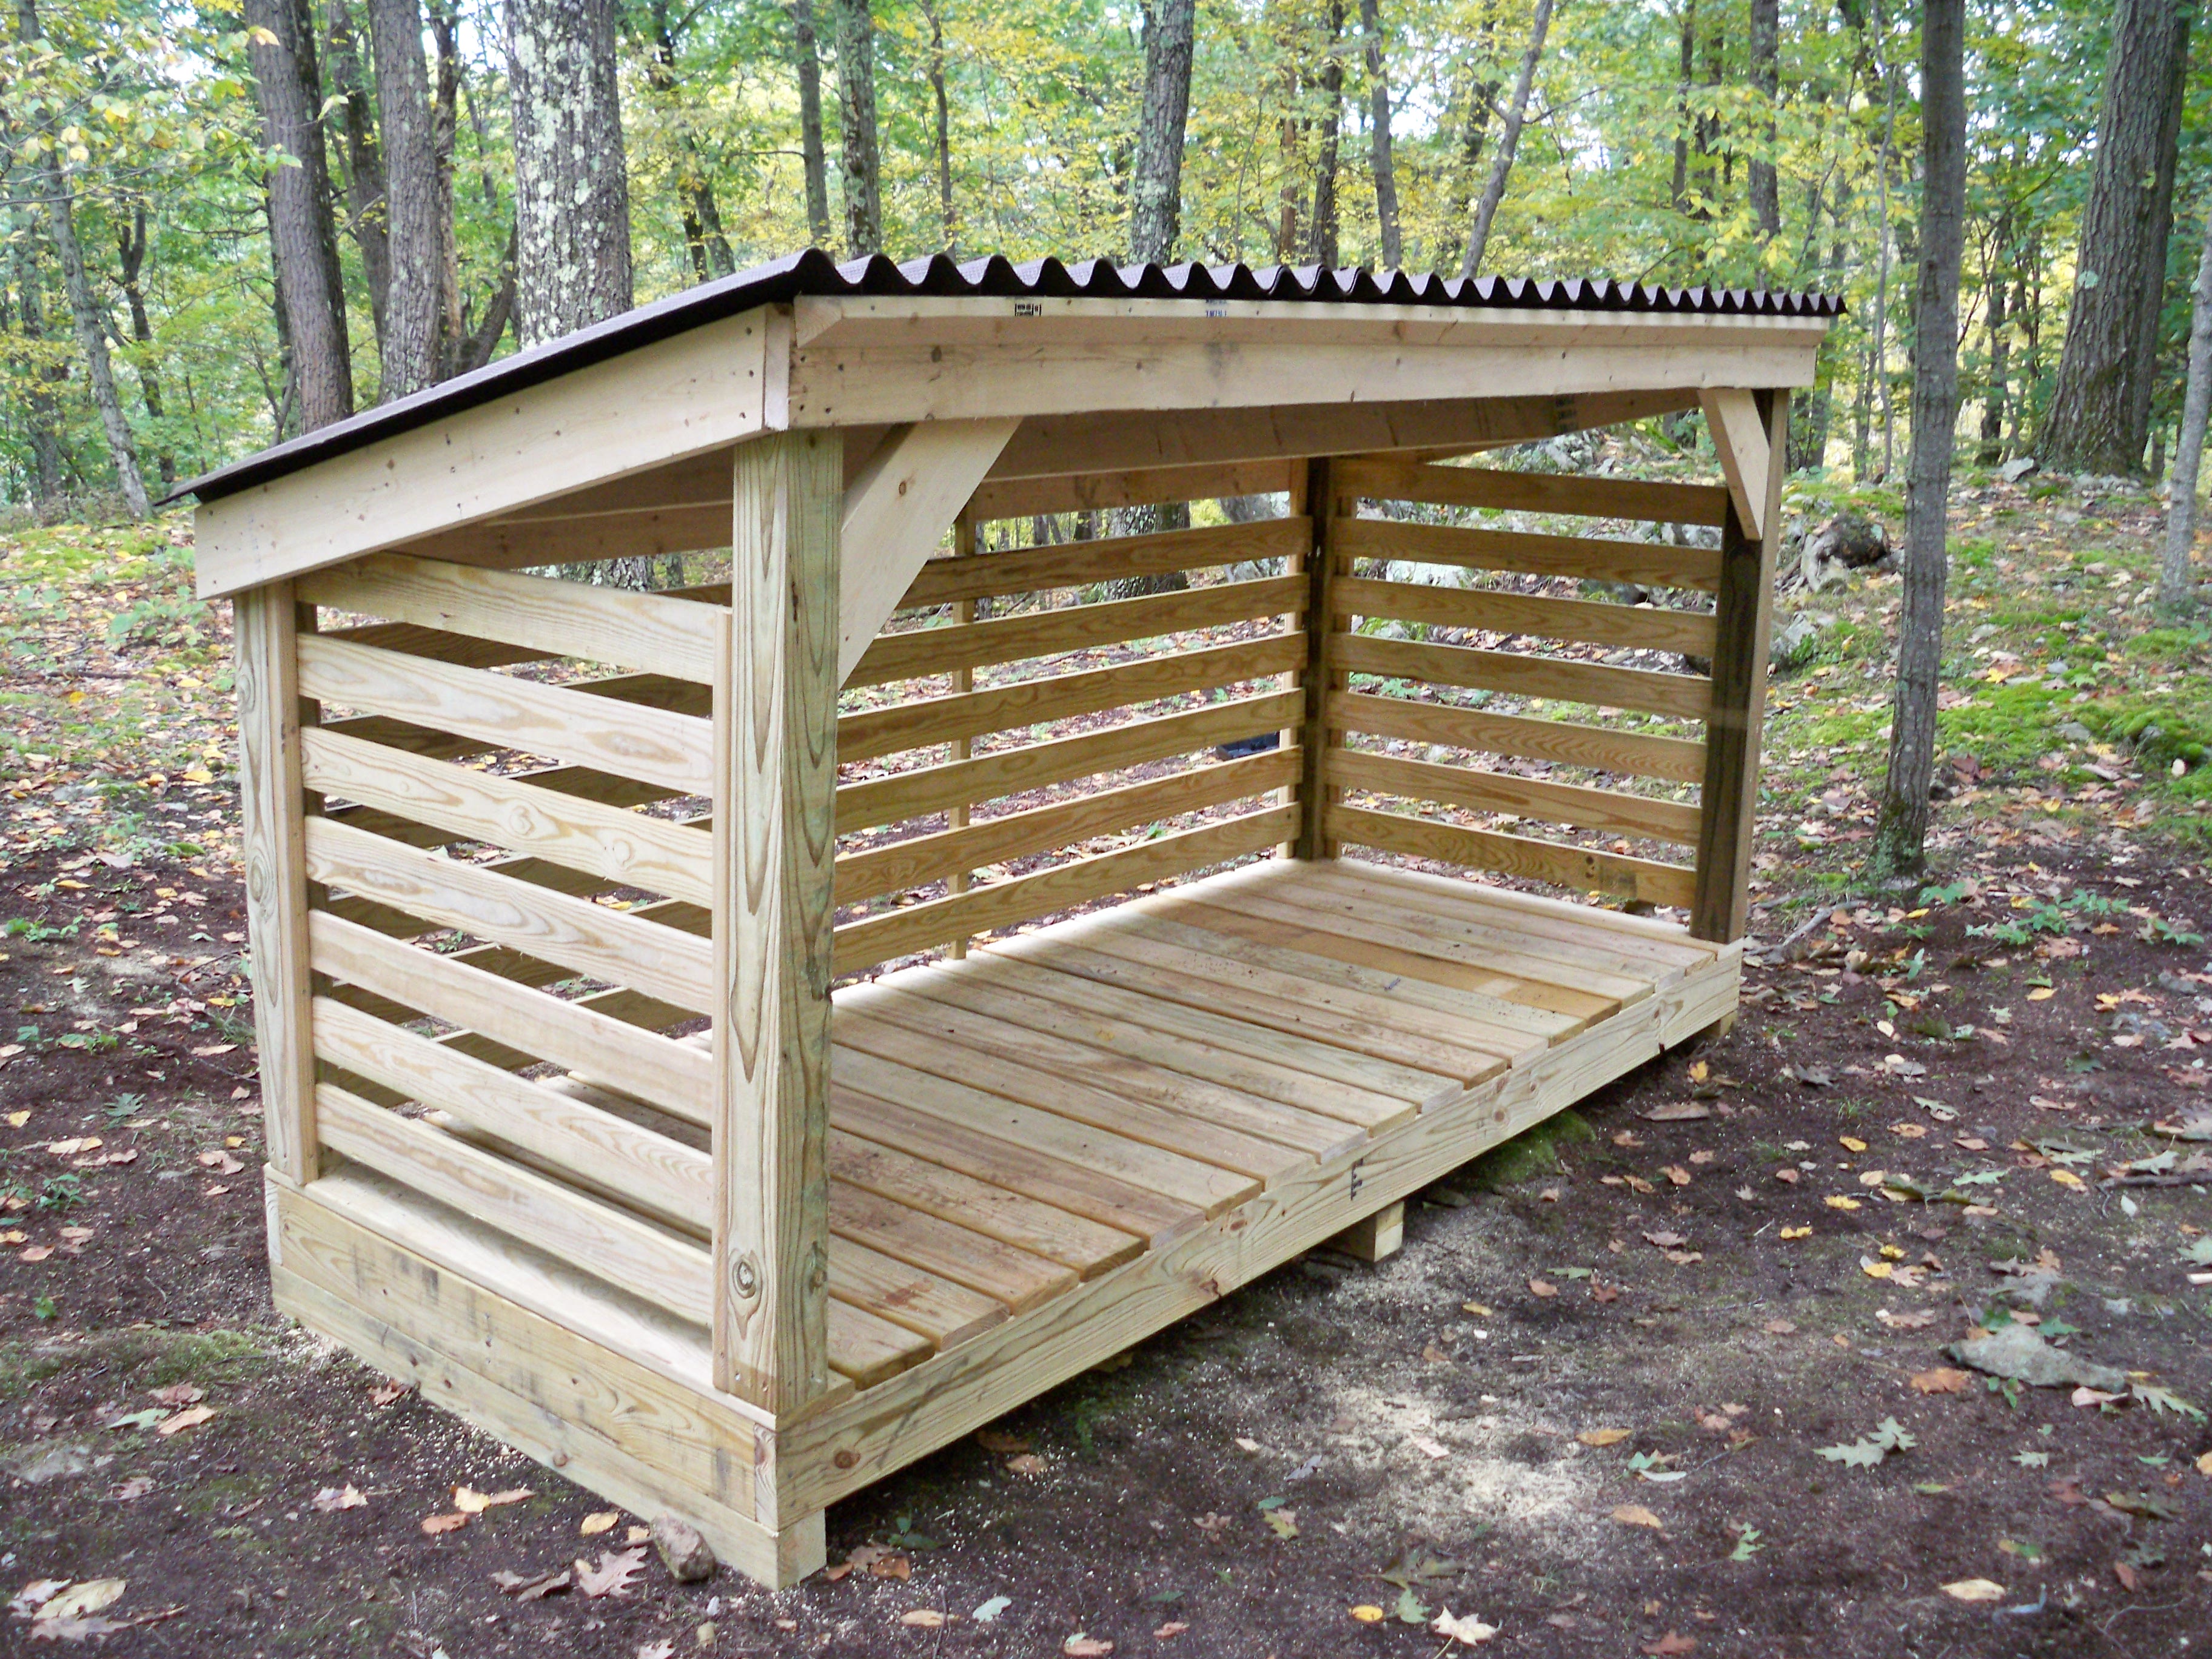 Plans to Build a Firewood Storage Shed